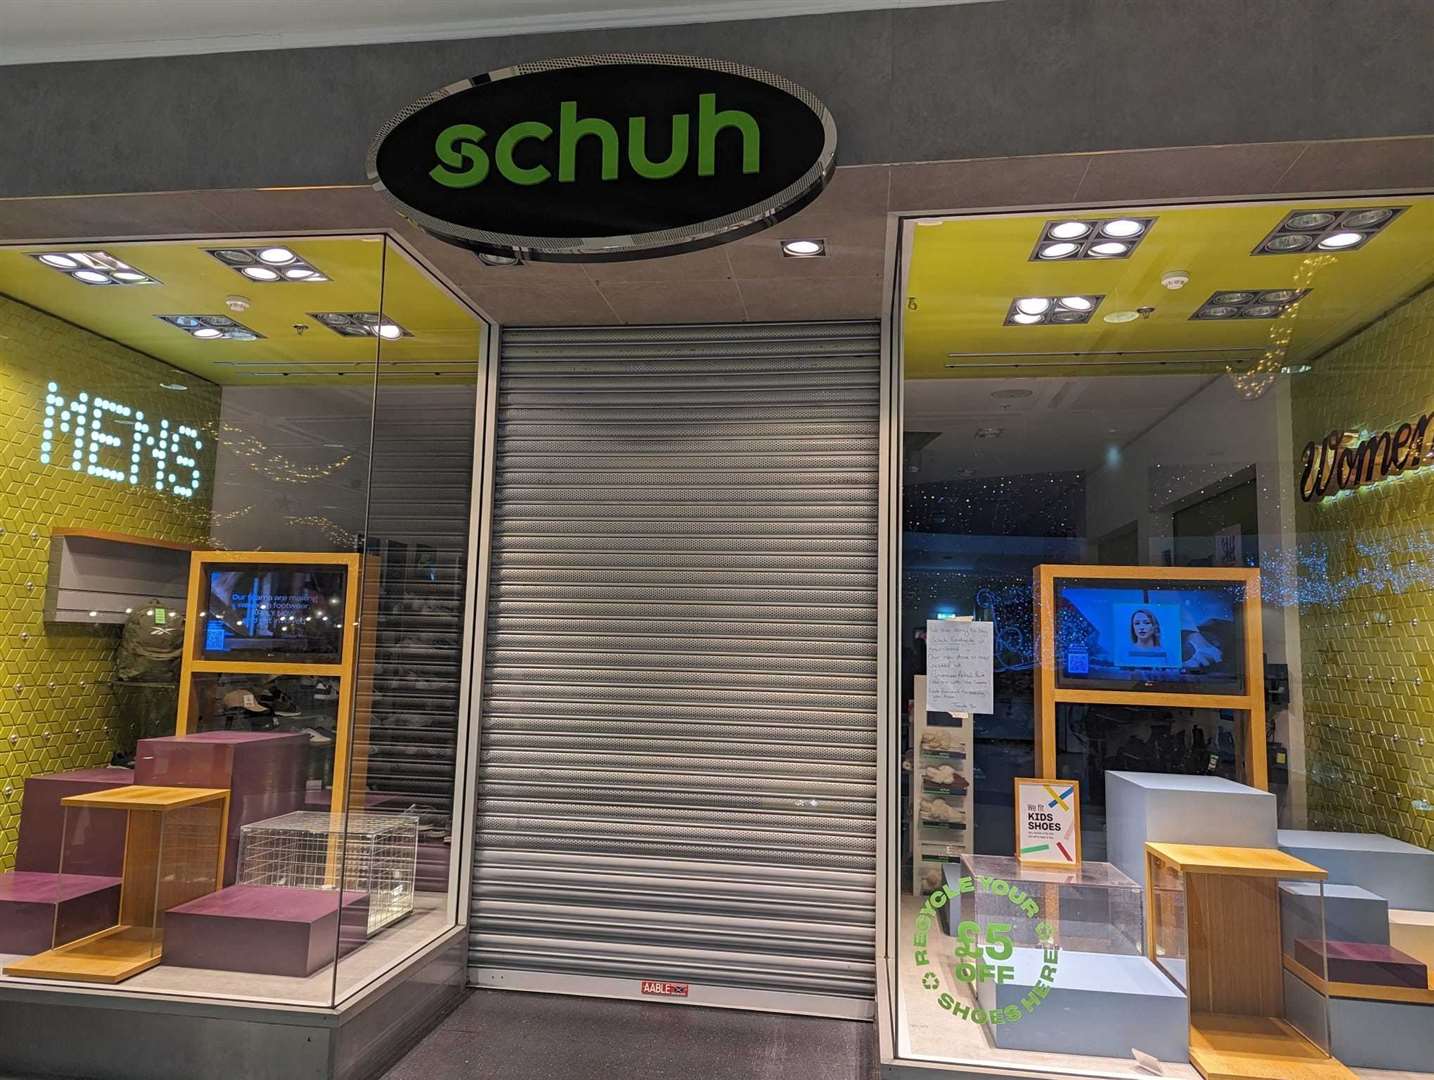 Schuh has closed at the Eastgate Shopping Centre.